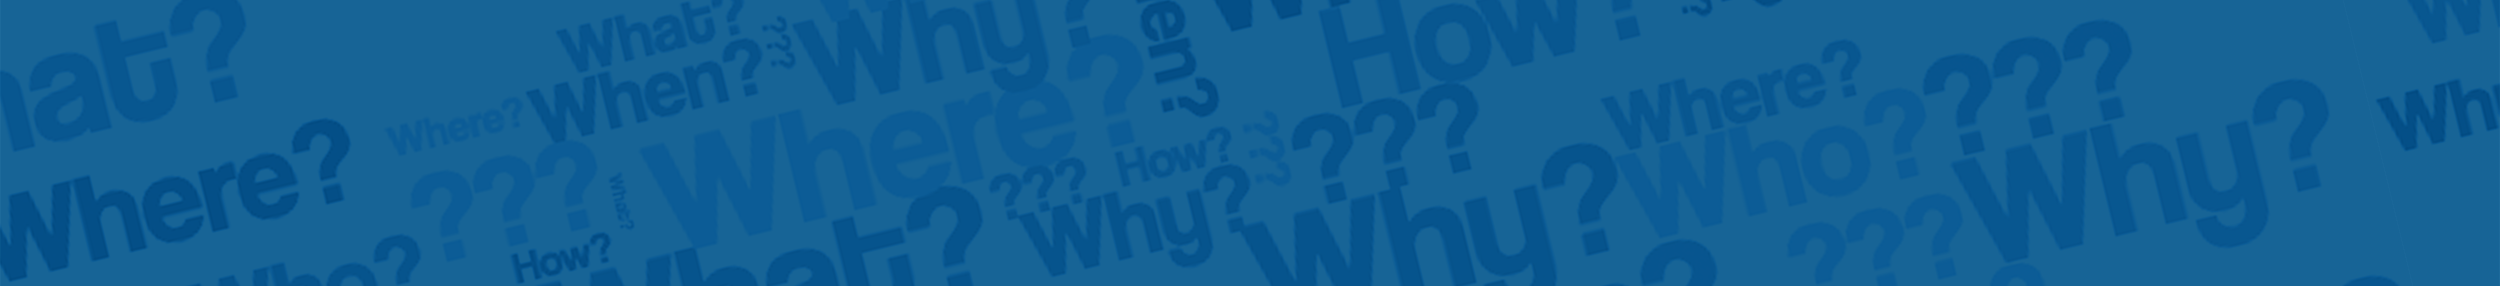 Blue headed with question words overlaid in a darker blue